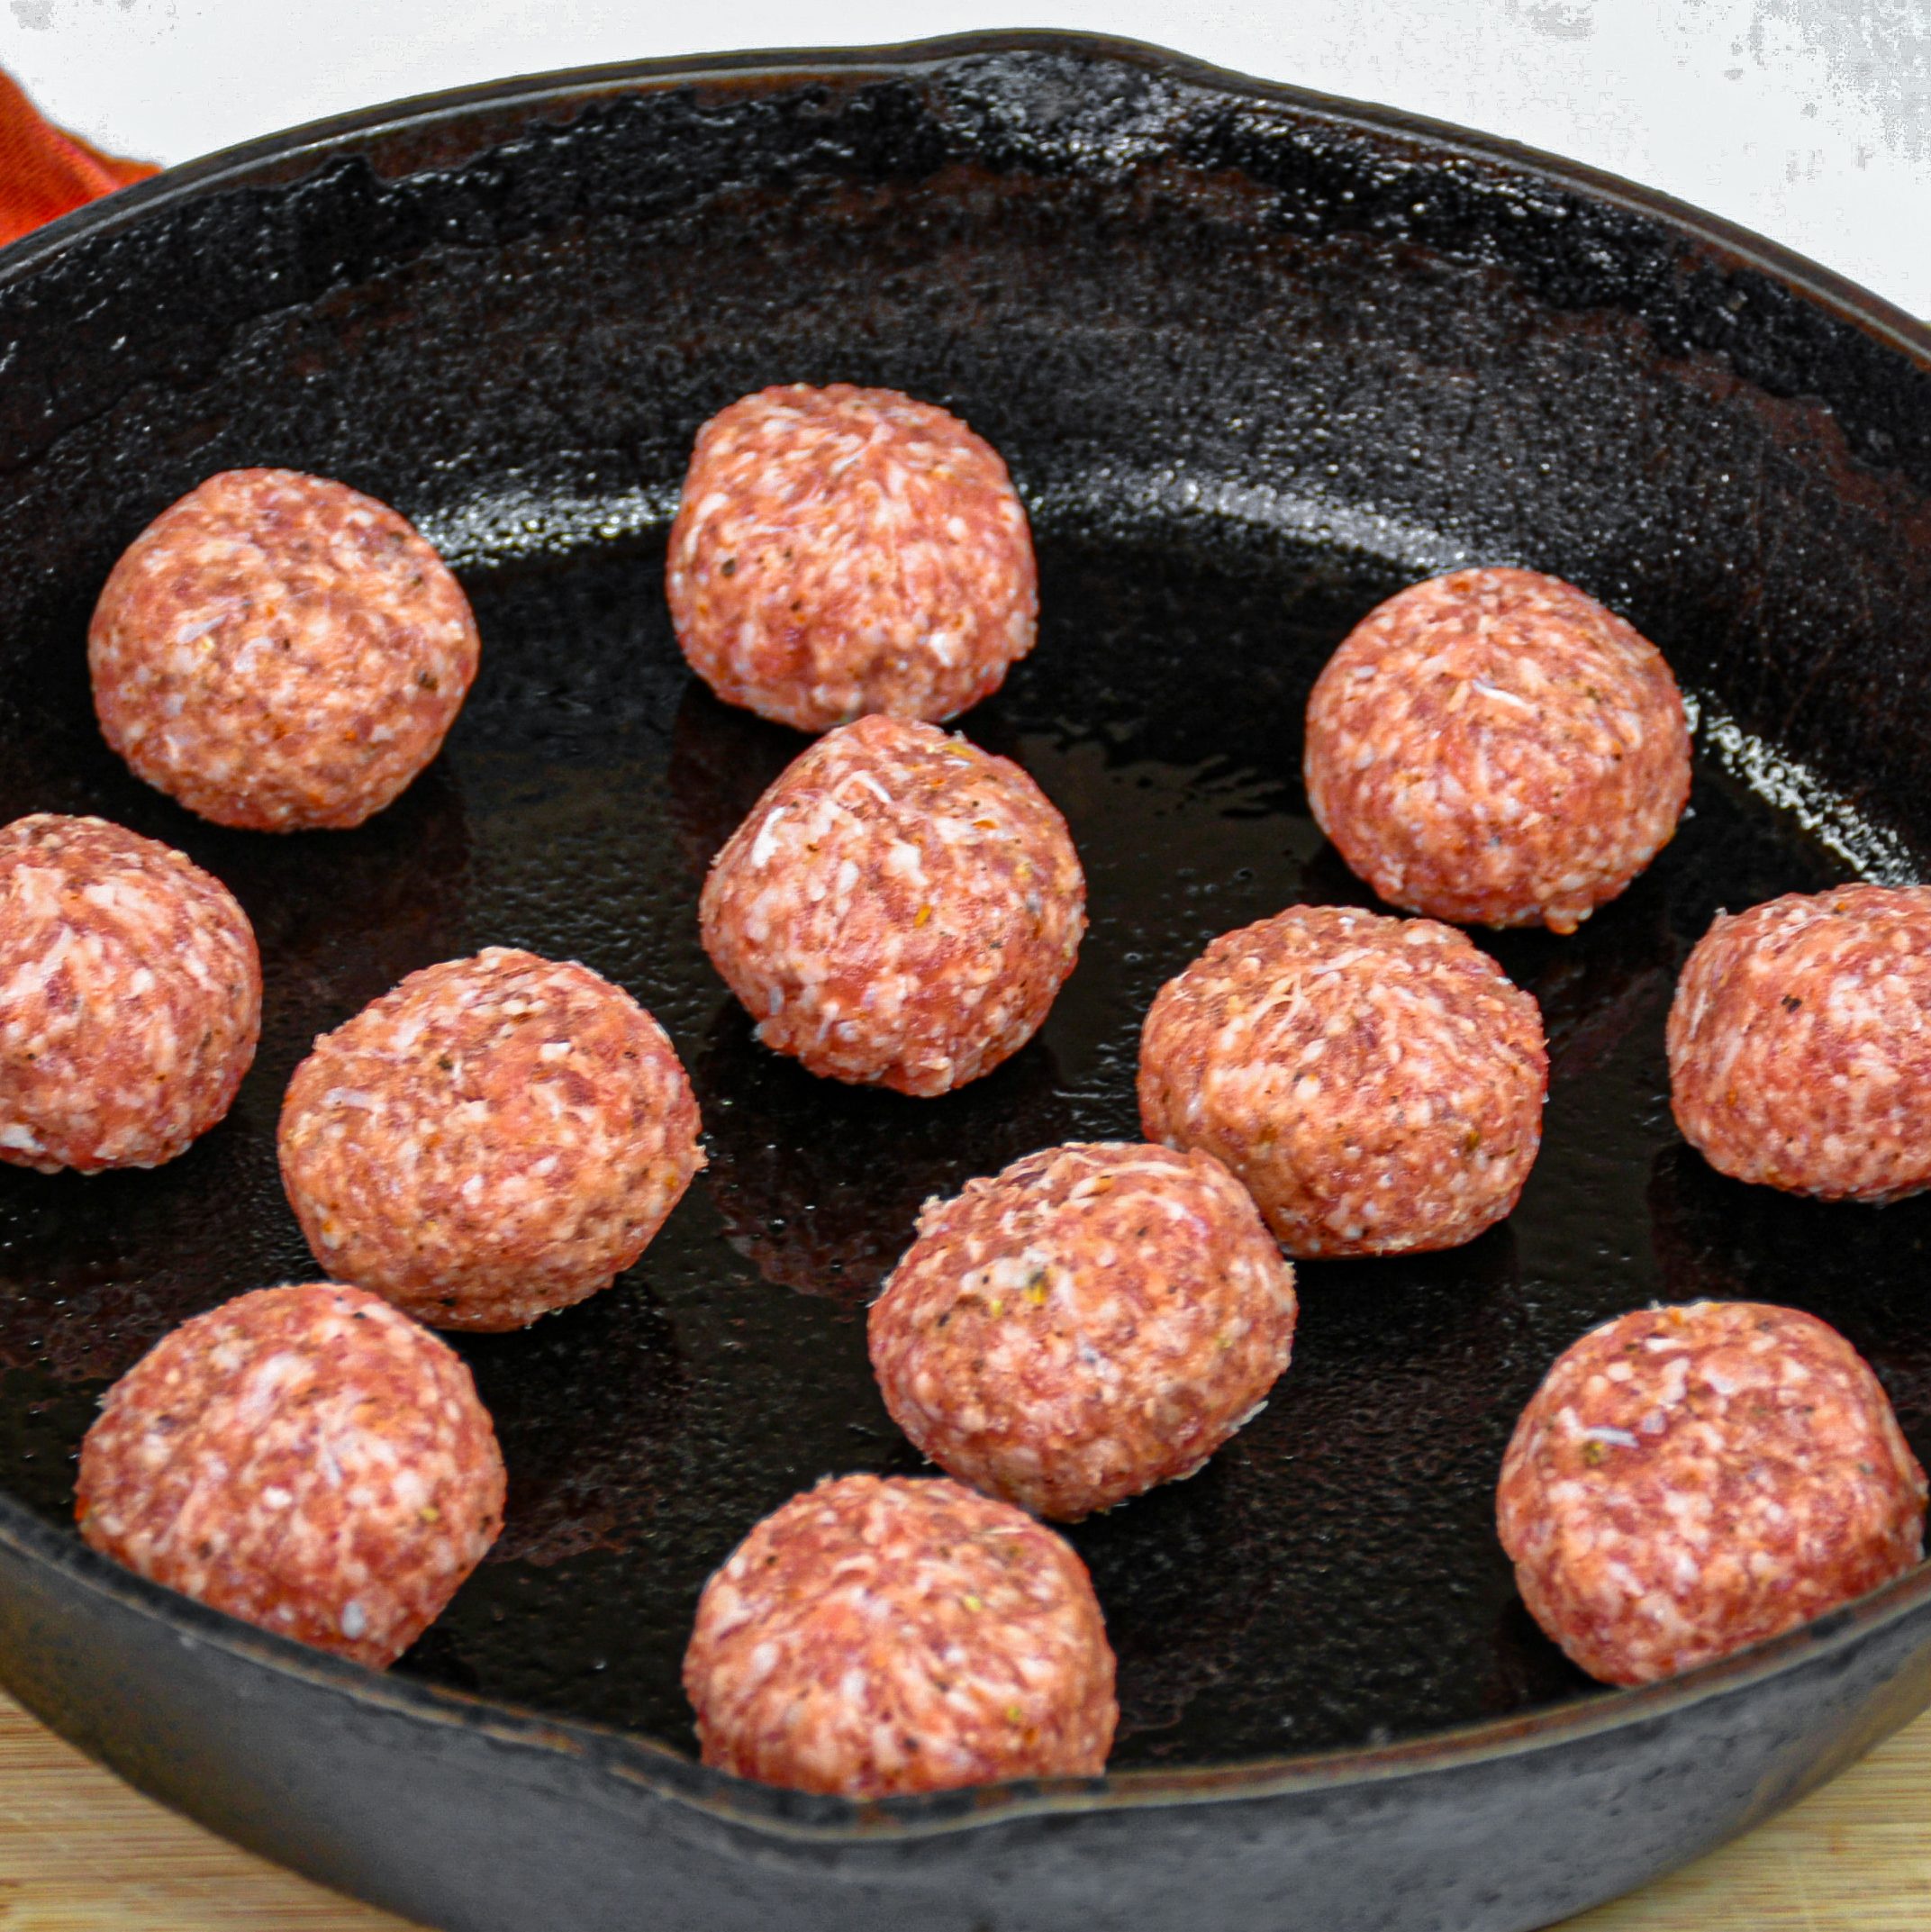 Add one meatball at a time to the heated skillet.